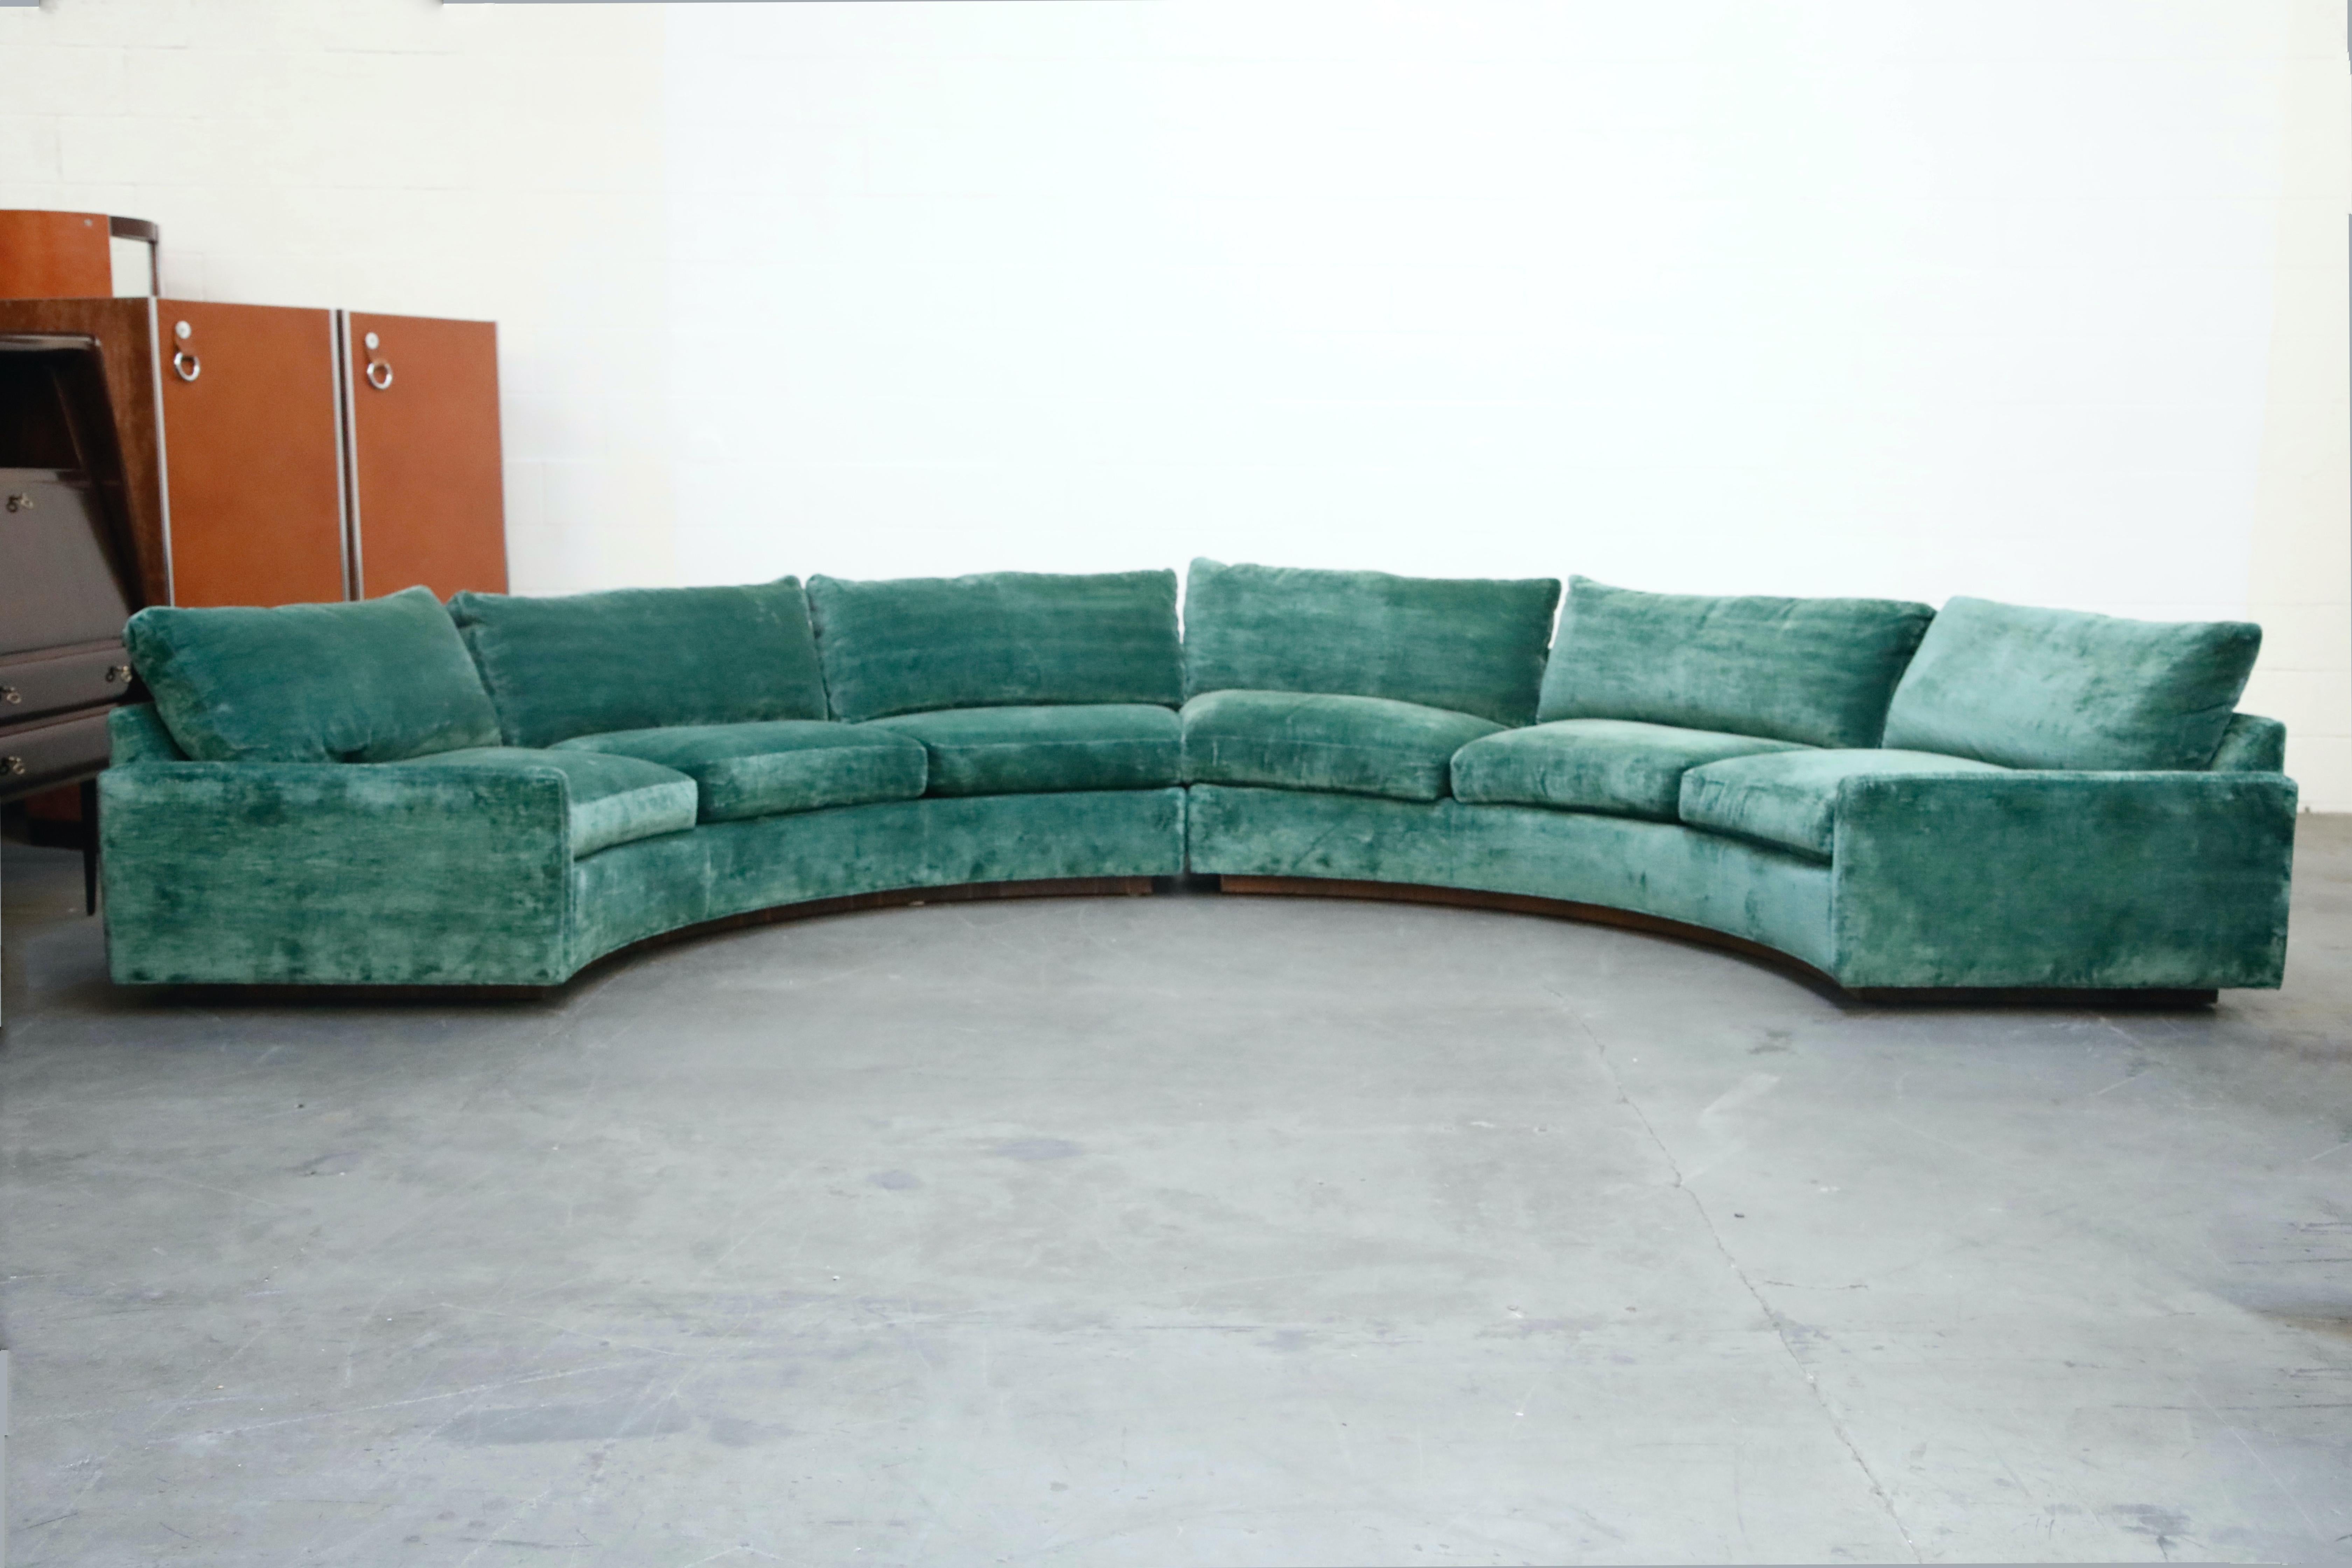 Extremely comfortable and increasingly rare, this large two piece sectional by Milo Baughman for Thayer Coggin, 1960s, features a curved semi-circle design on Rosewood plinth base. This example has been reupholstered in recent years in a teal